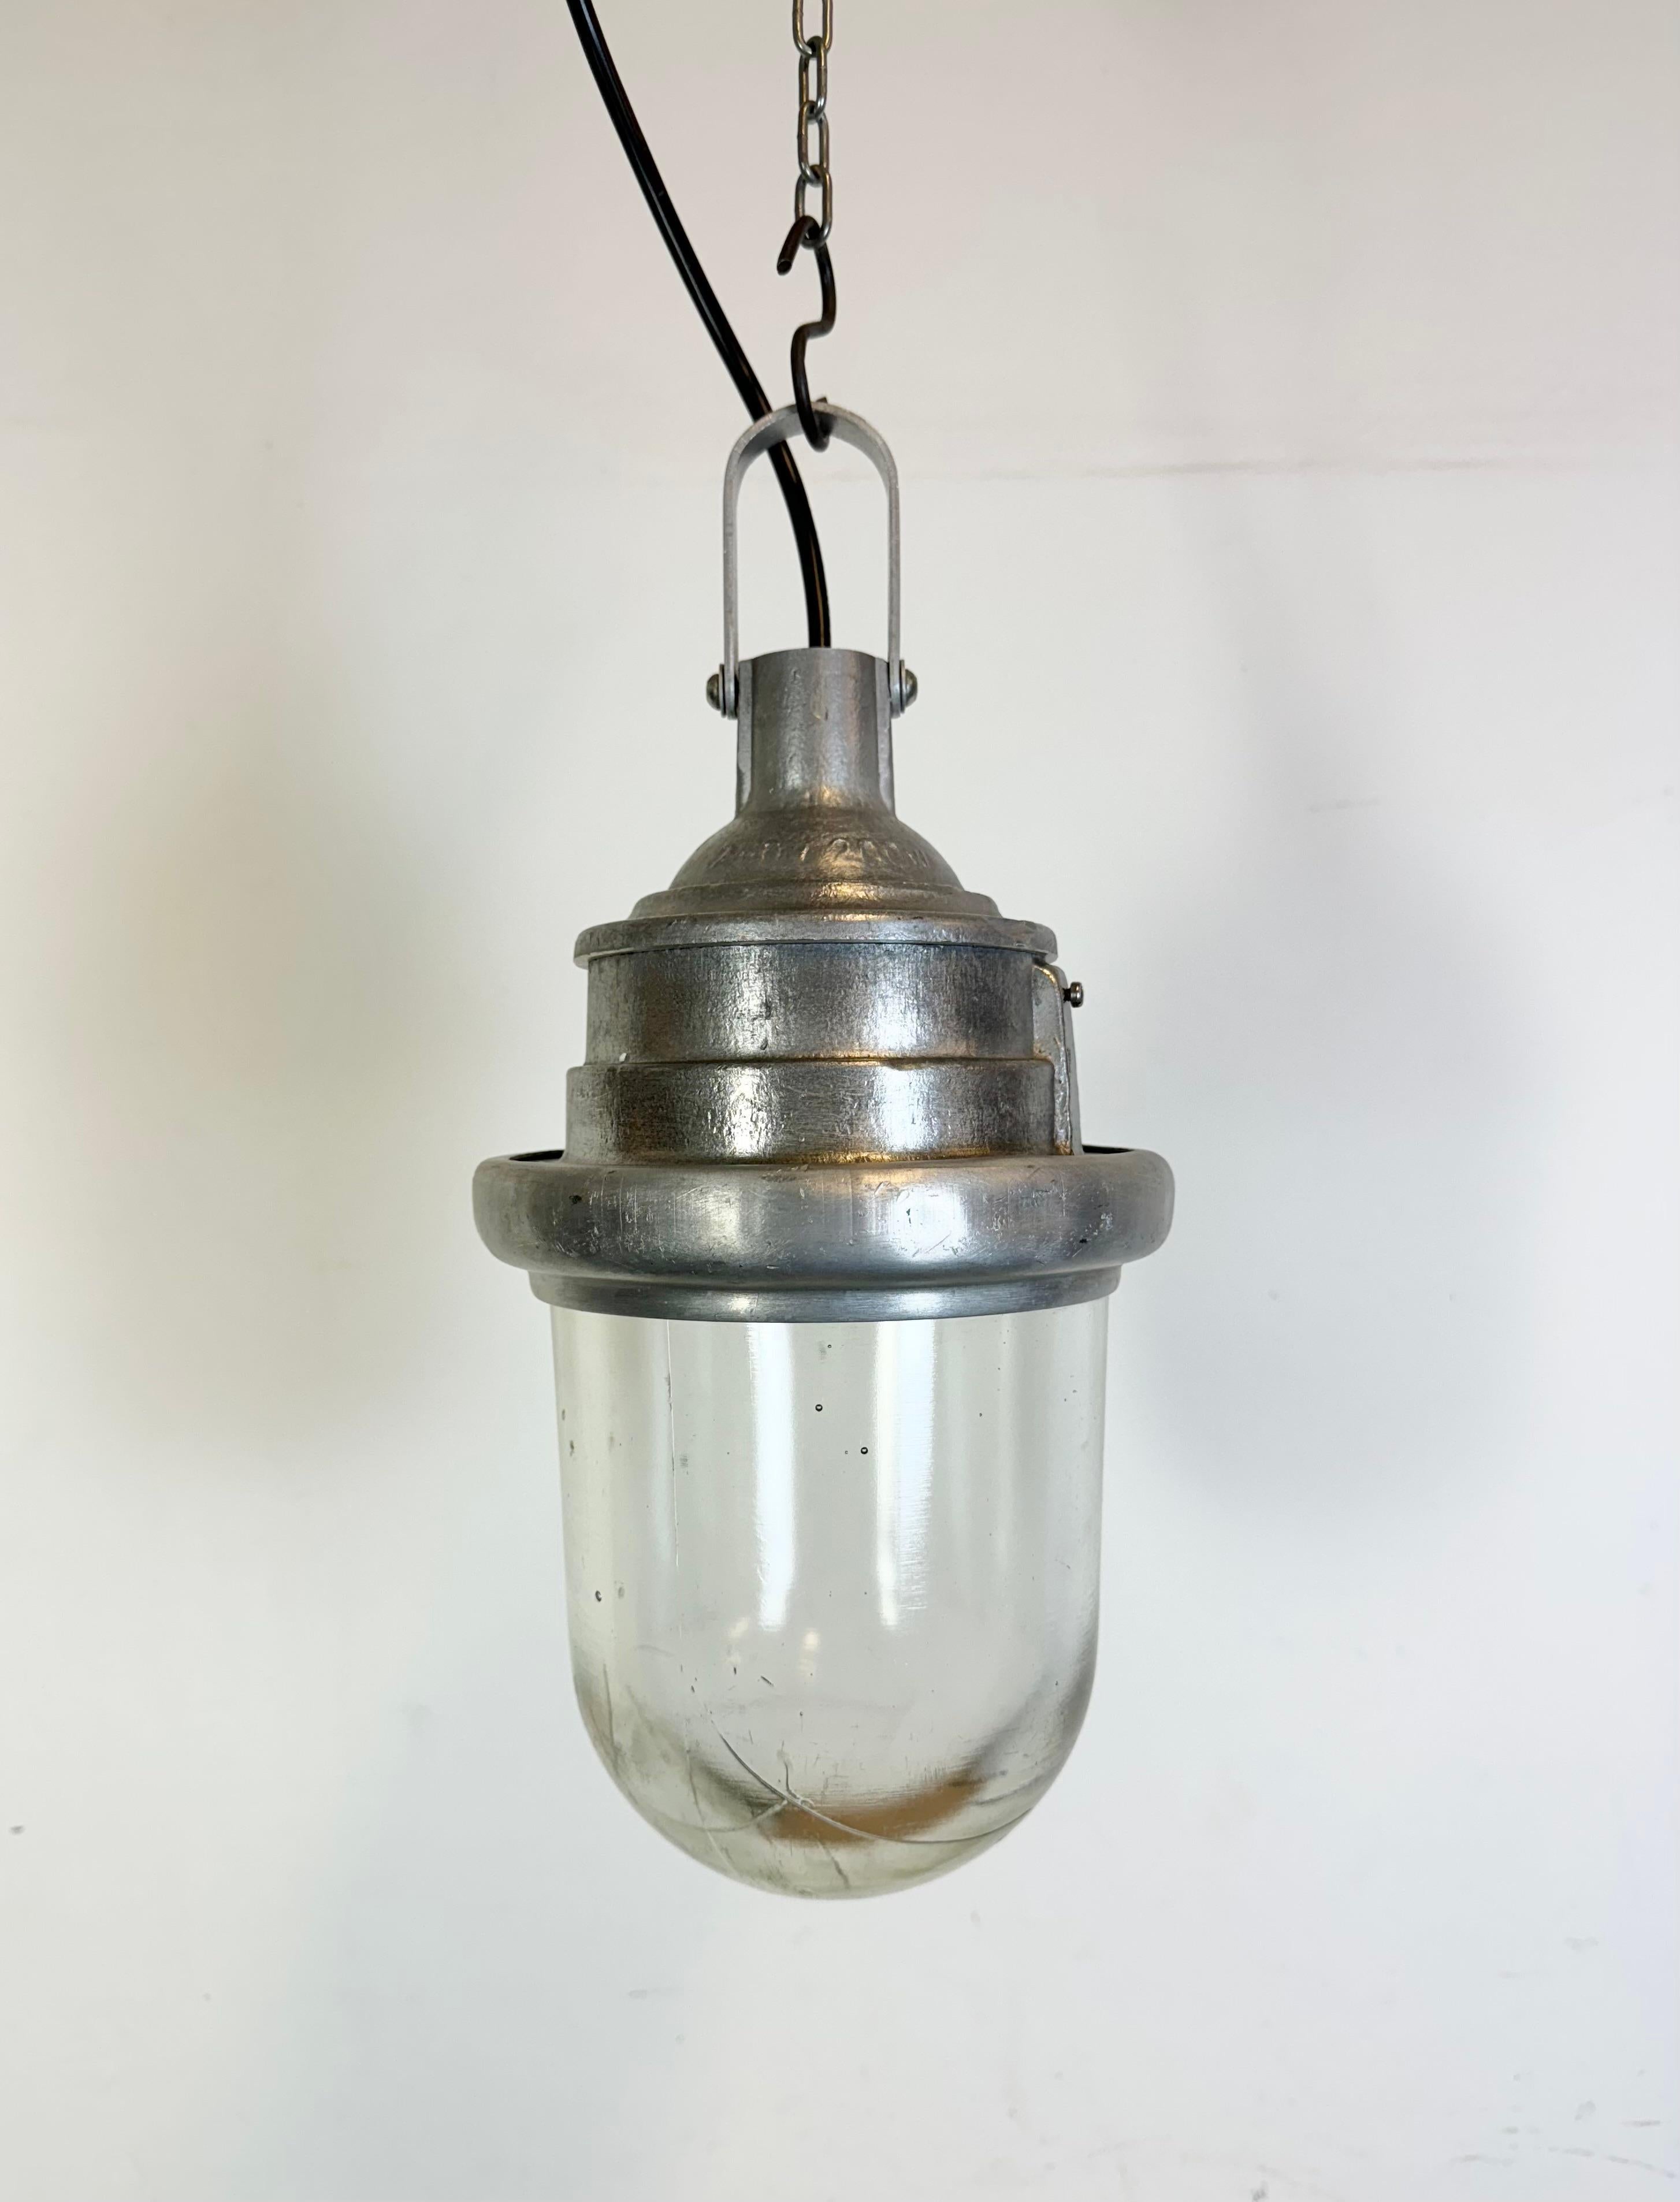 - Vintage Industrial factory light from the 1960s 
- Made in Ukraine in former Soviet Union
- Cast aluminium body
- Clear glass
- Socket requires standard E27/ E26 lightbulbs 
- New wire 
- Diameter of the lamp: 19 cm
- Height : 37 cm
- Weight : 4,3